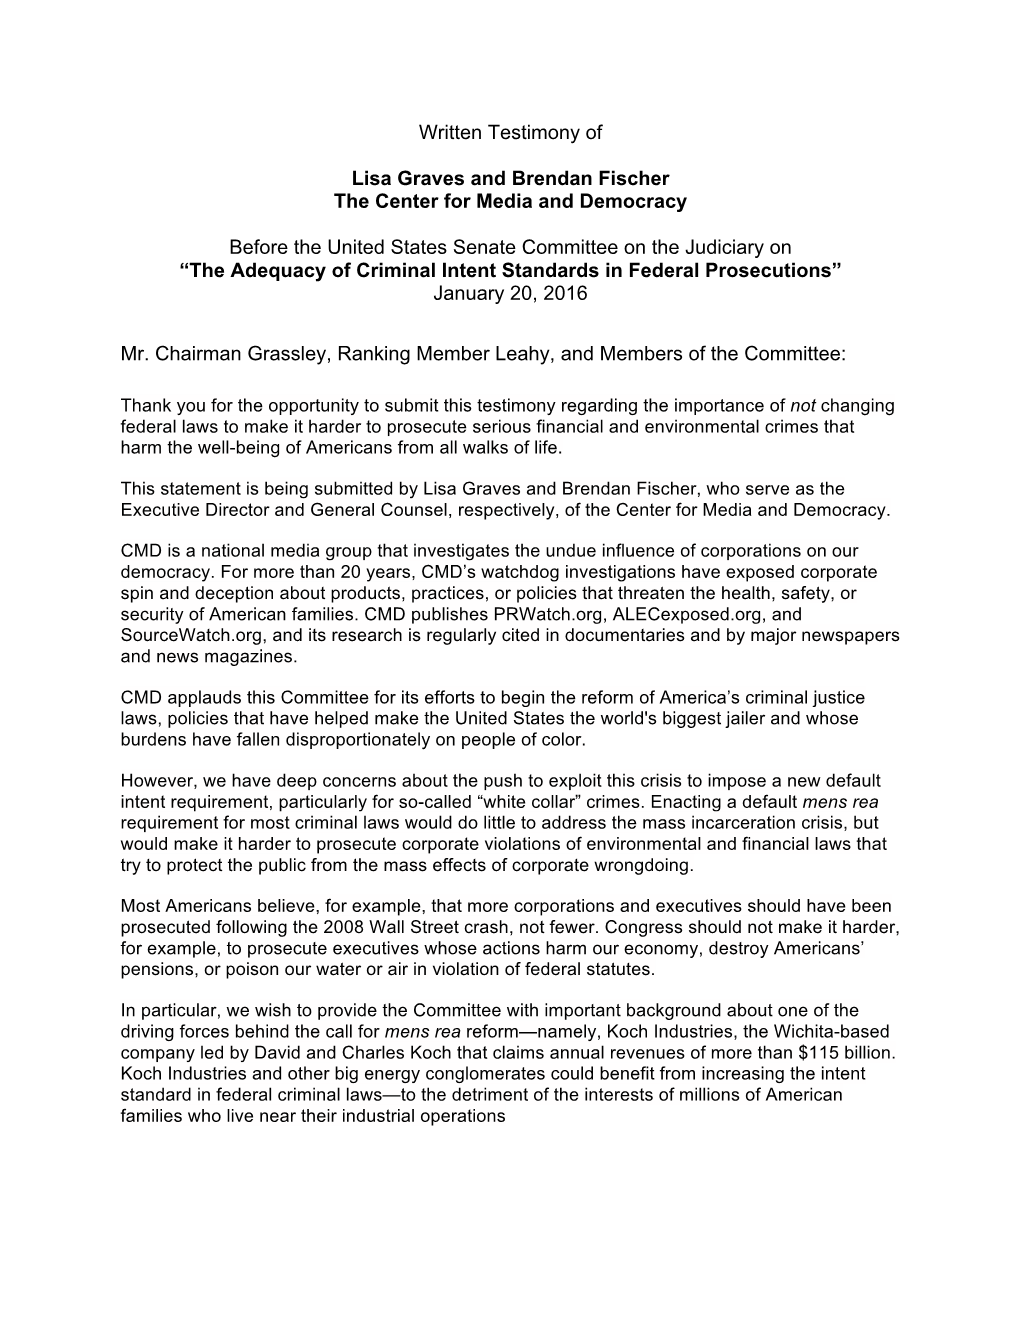 Written Testimony of Lisa Graves and Brendan Fischer the Center for Media and Democracy Before the United States Senate Commit